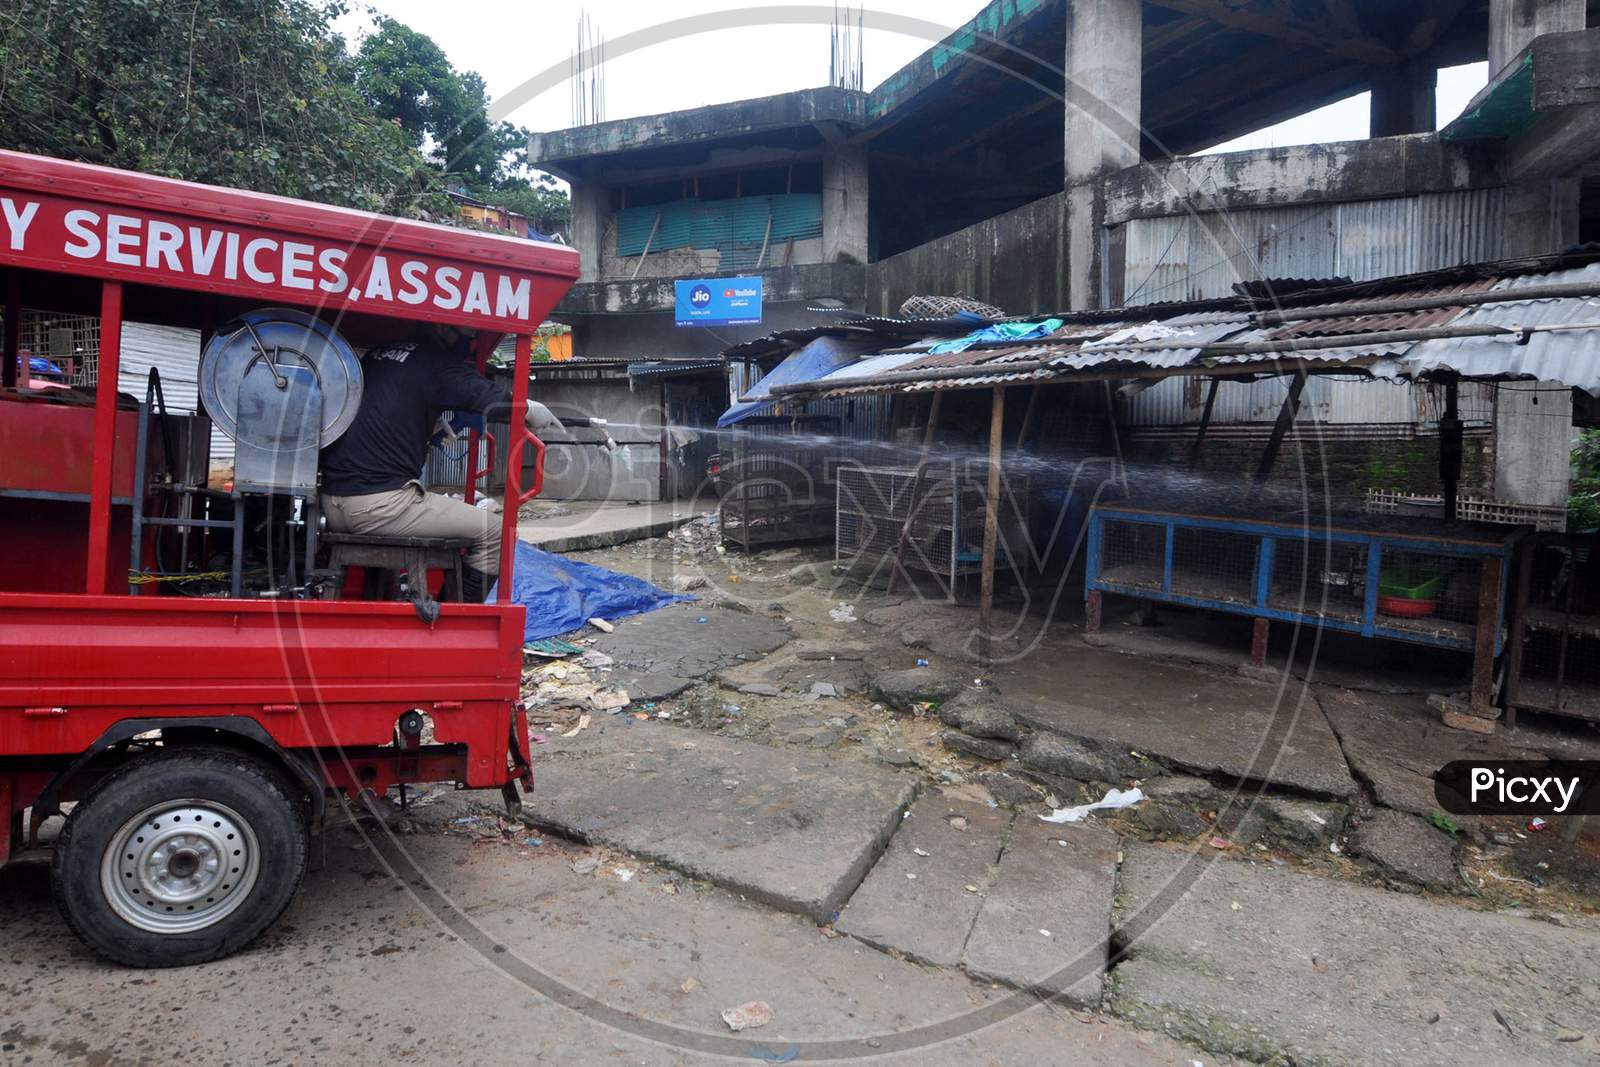 A firefighter sprays disinfectant in a local market area during lockdown in Guwahati, Assam on July 2, 2020